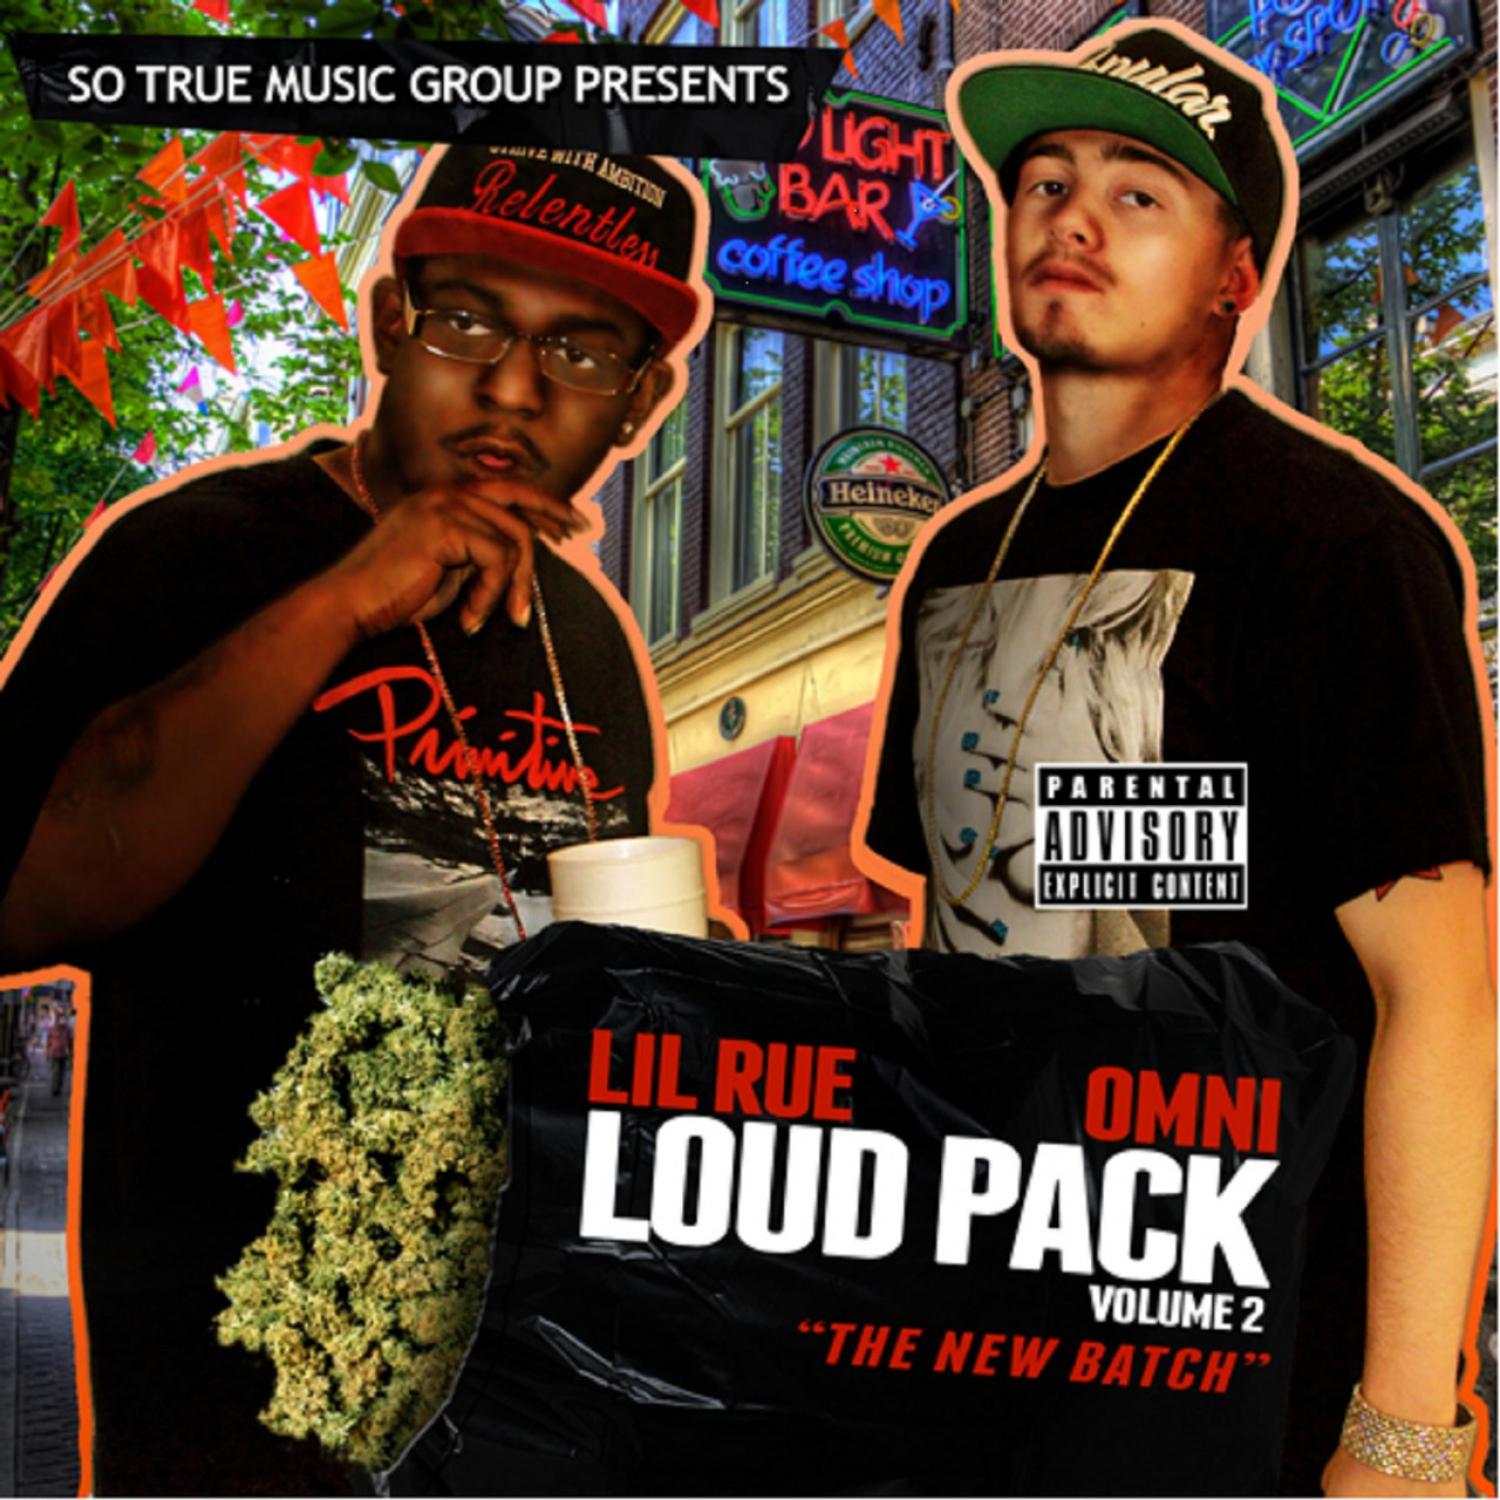 Loud Pack Volume 2: The New Batch